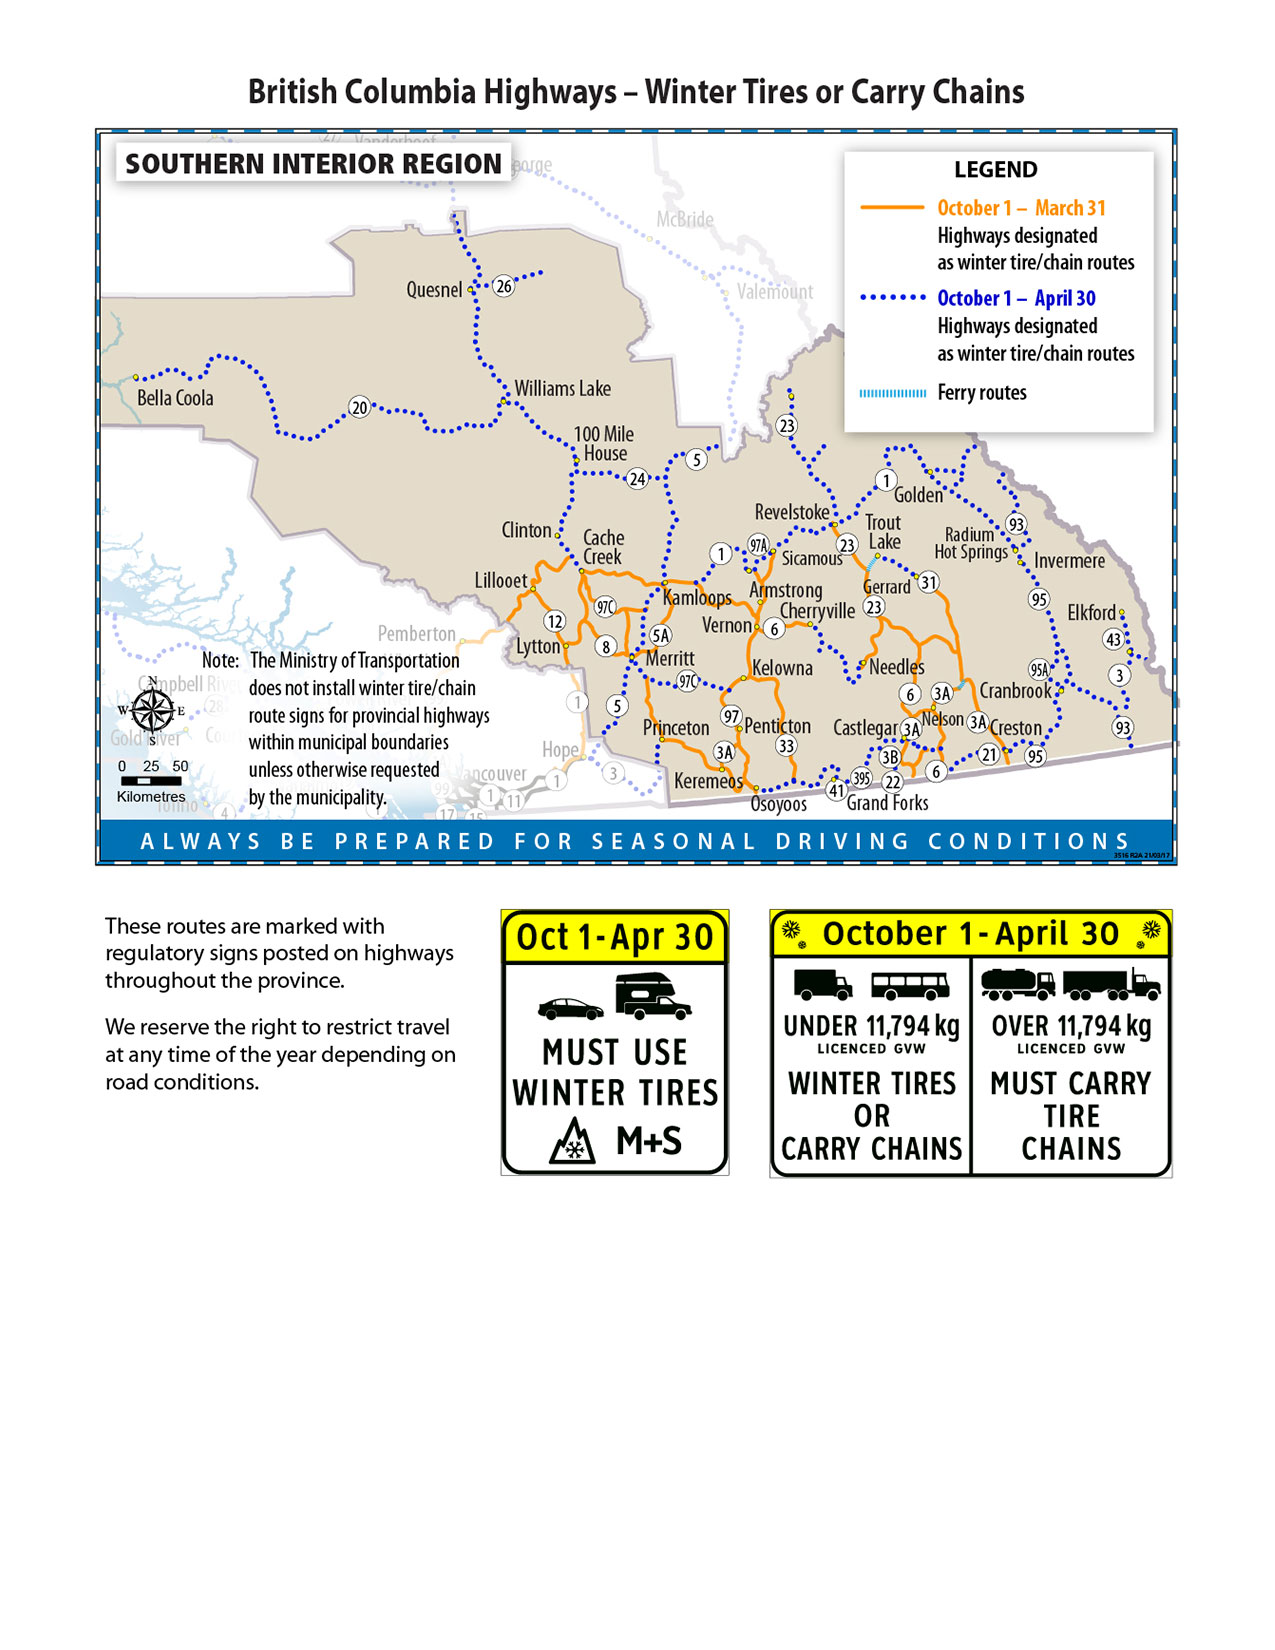 Southern Interior Region map of winter tire and chains requirements